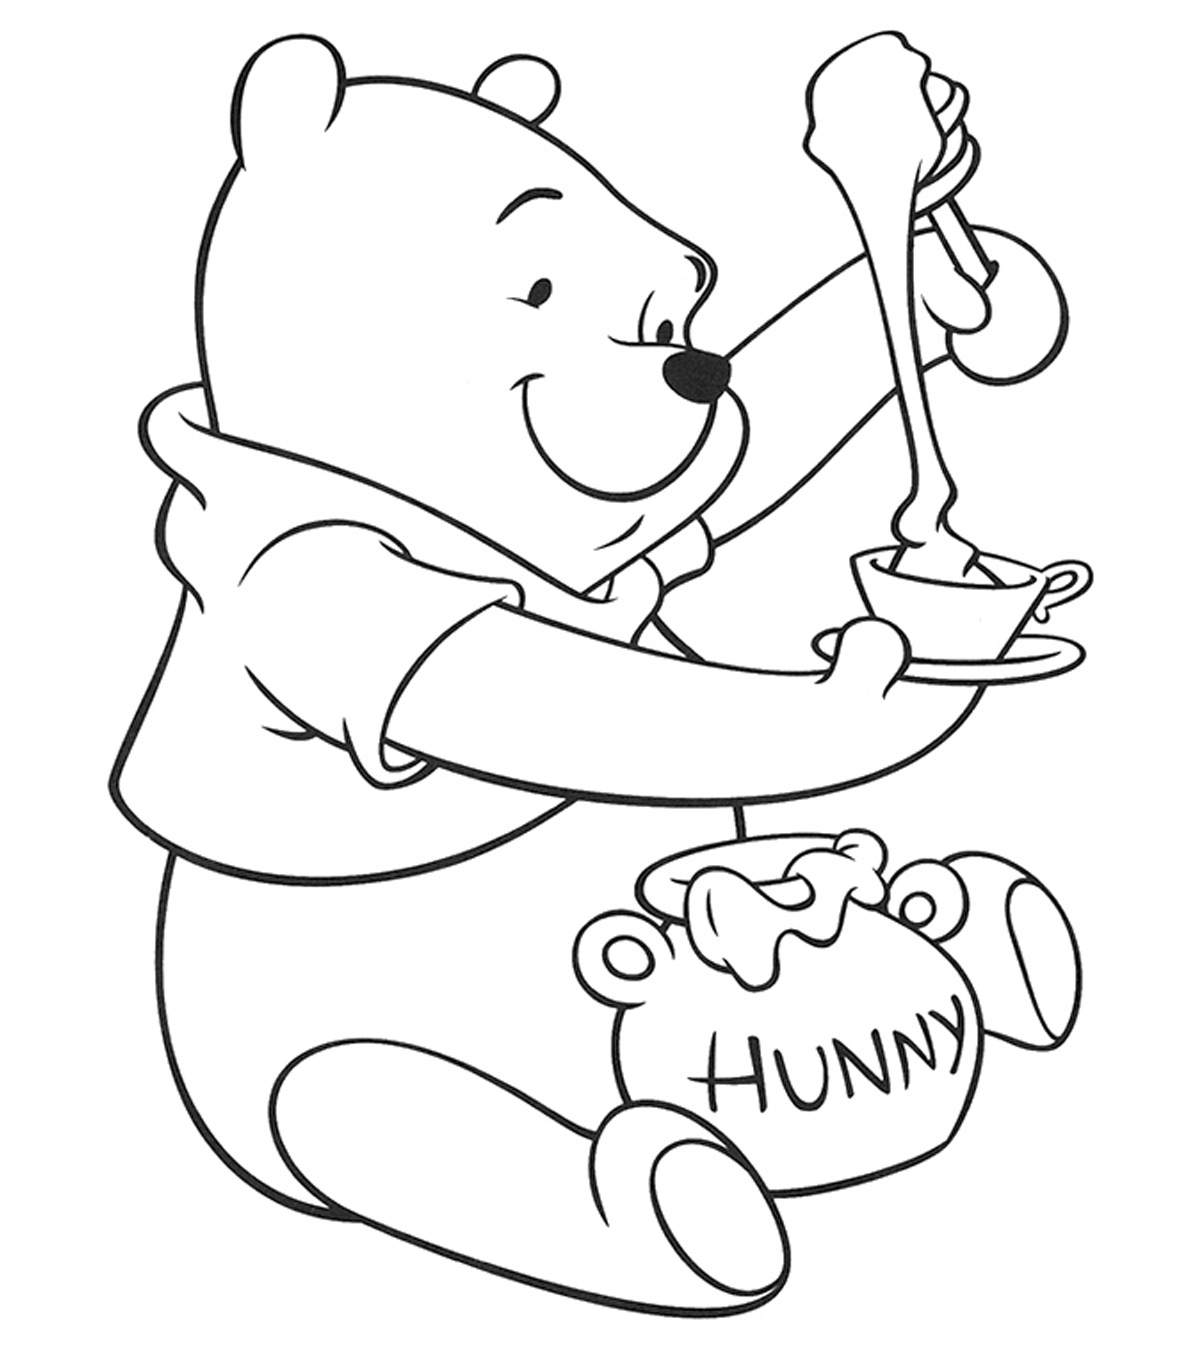 10 Best Bear Coloring Pages For Your Little Ones